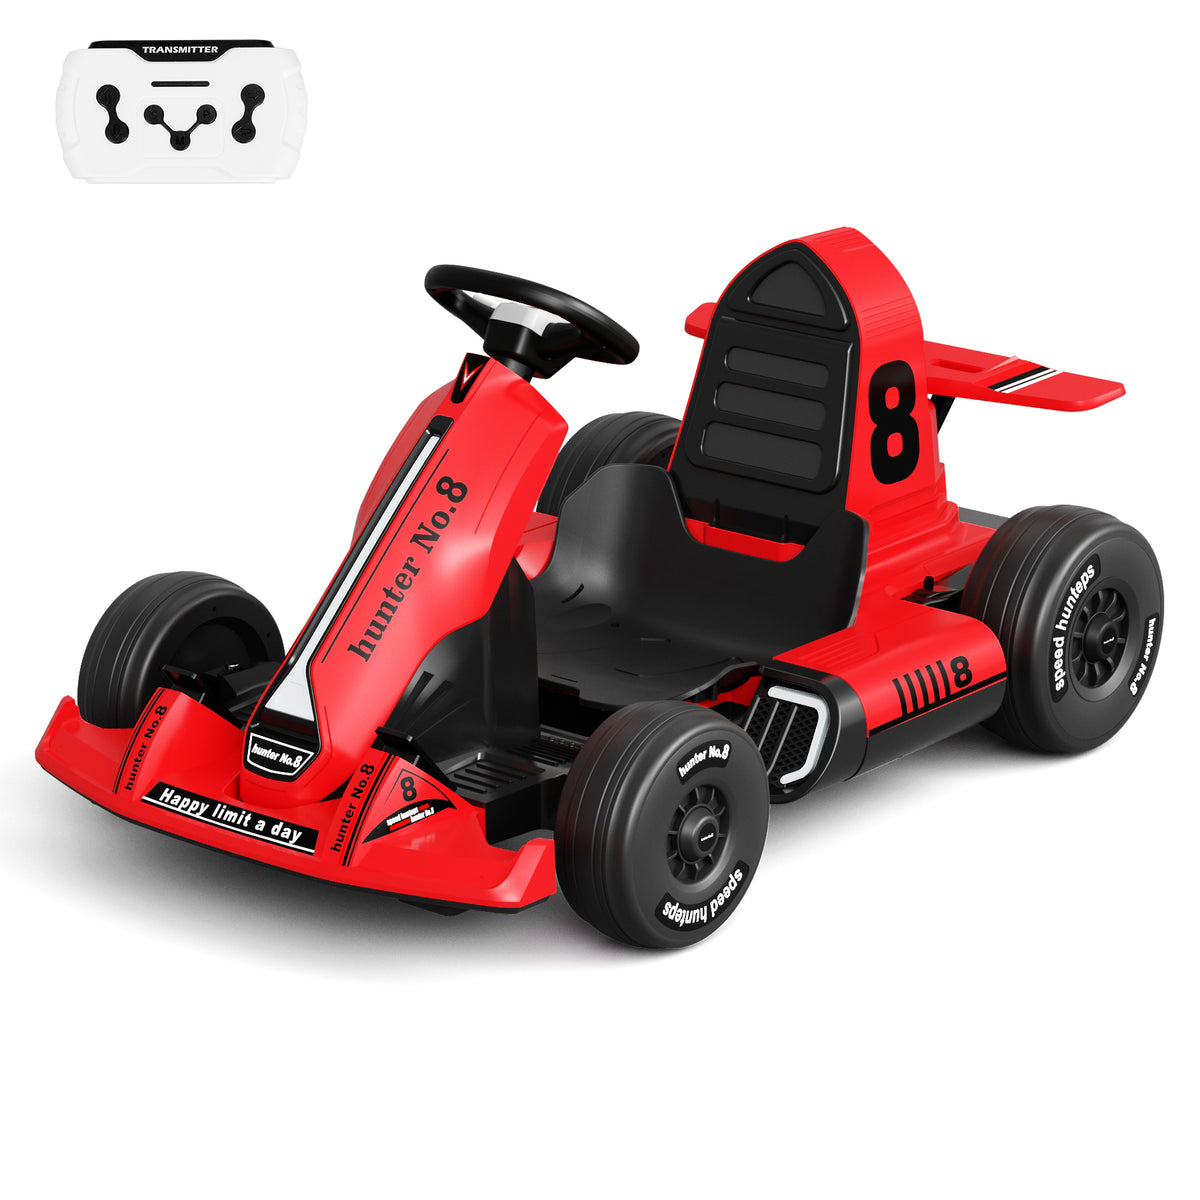 XJD 12V Electric Drifting Go Kart for Kids Battery Powered Driving Car Toy with Remote Control/Cool Lights/Bluetooth Music, Red